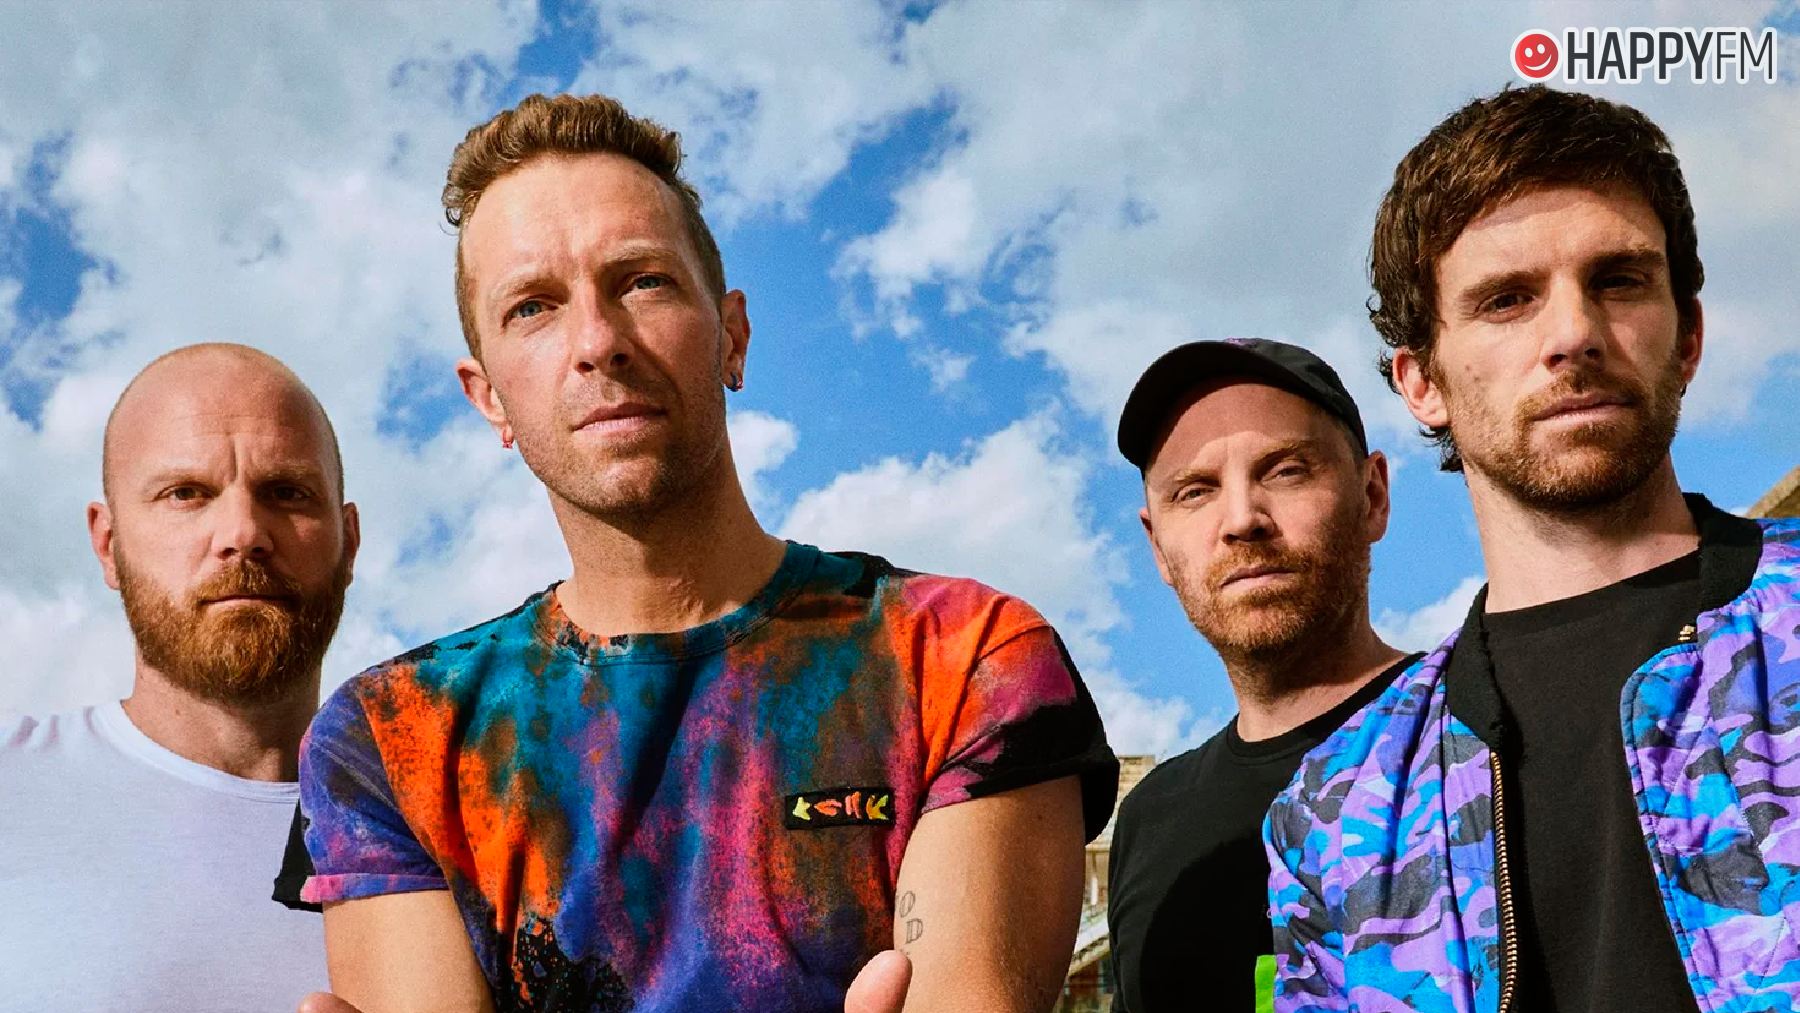 coldplay.